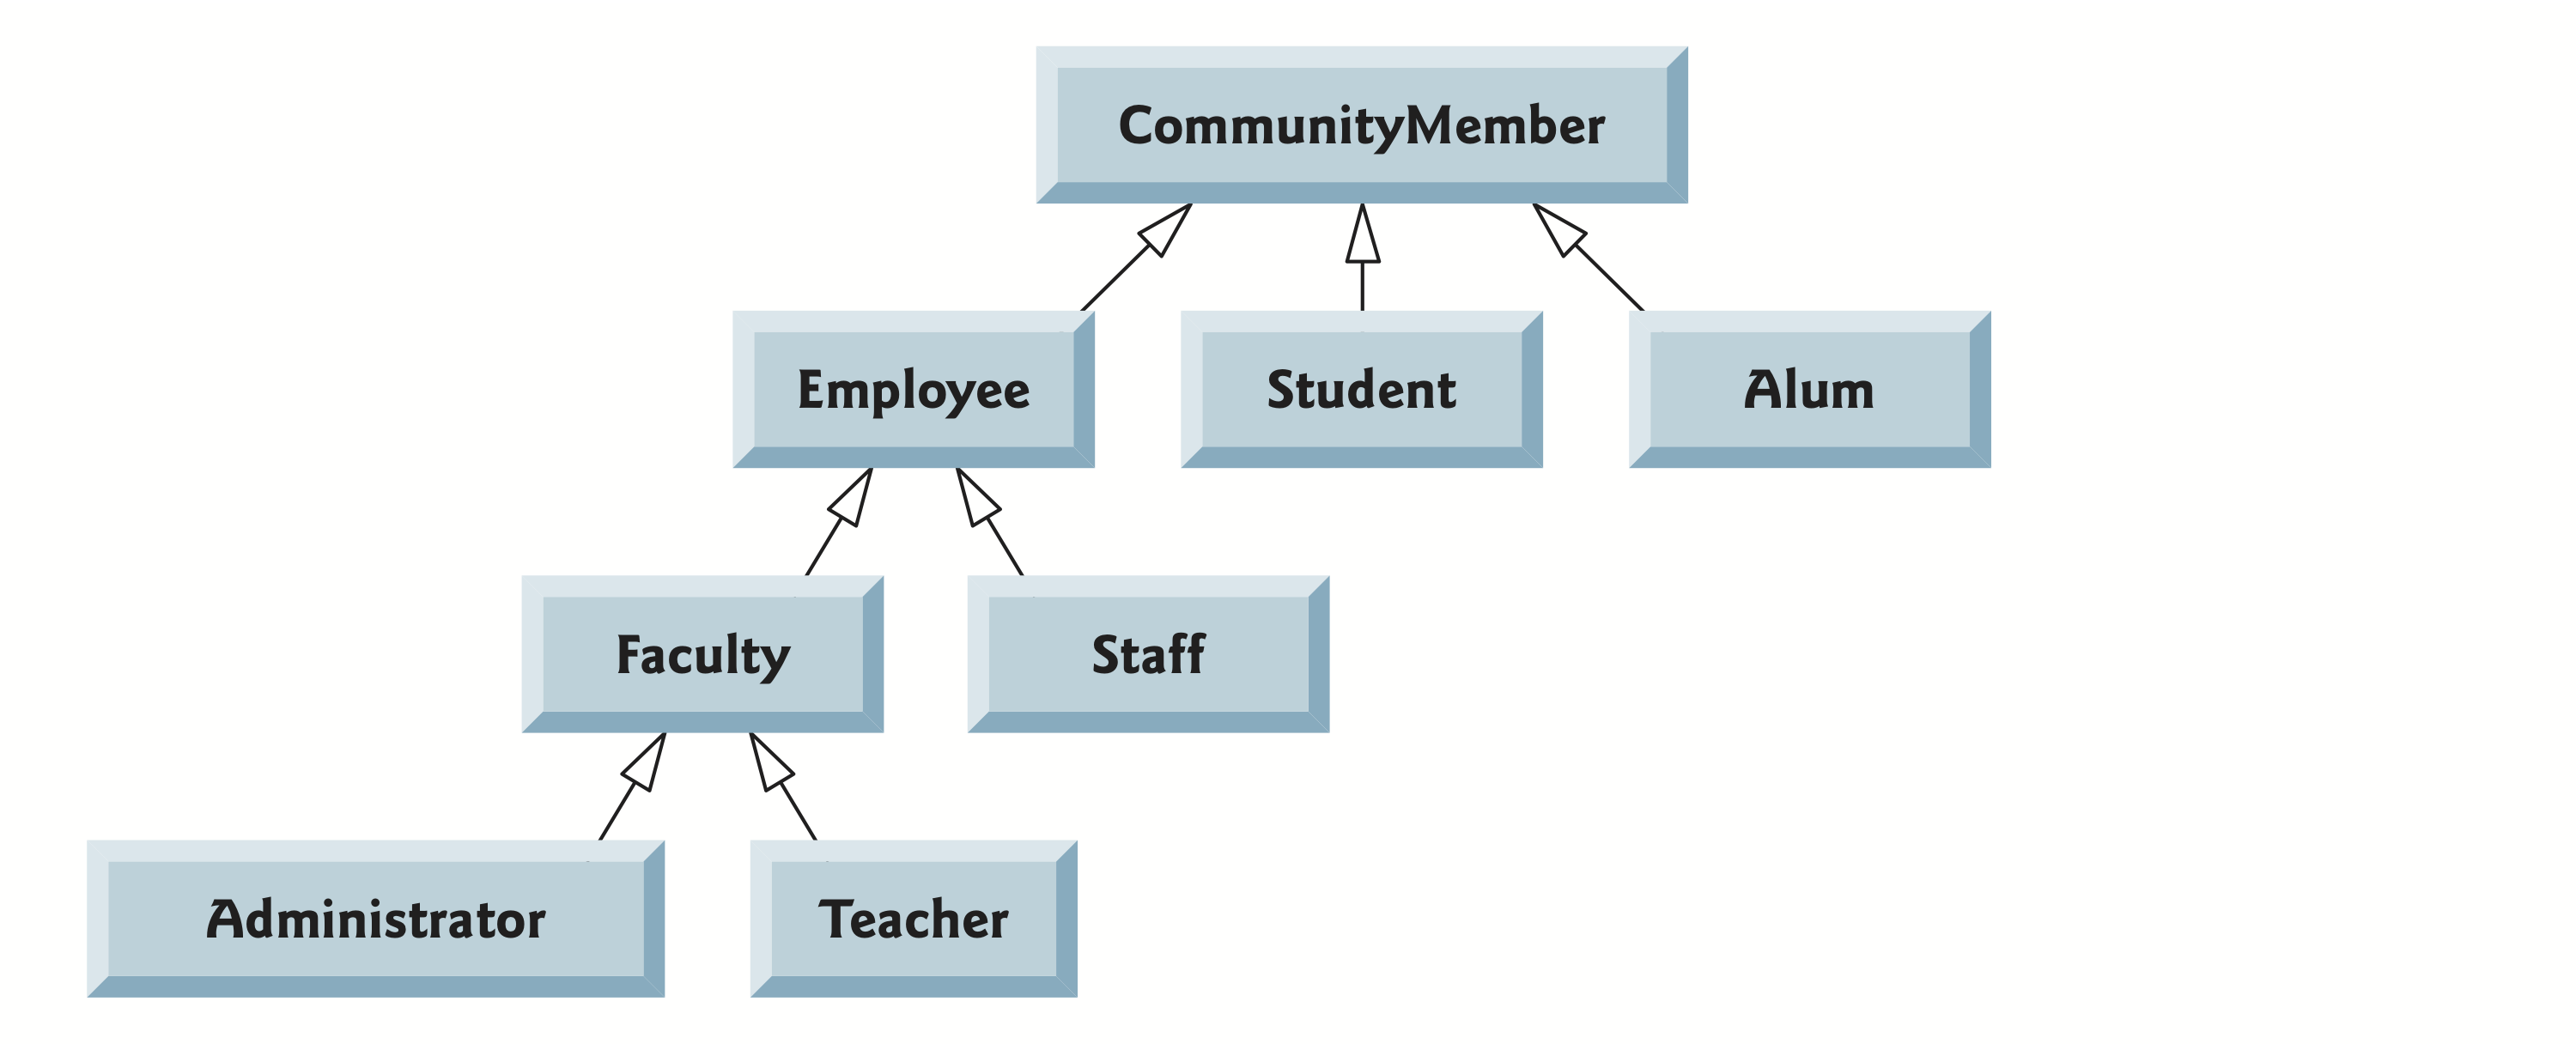 Sample class hierarchy for a university community